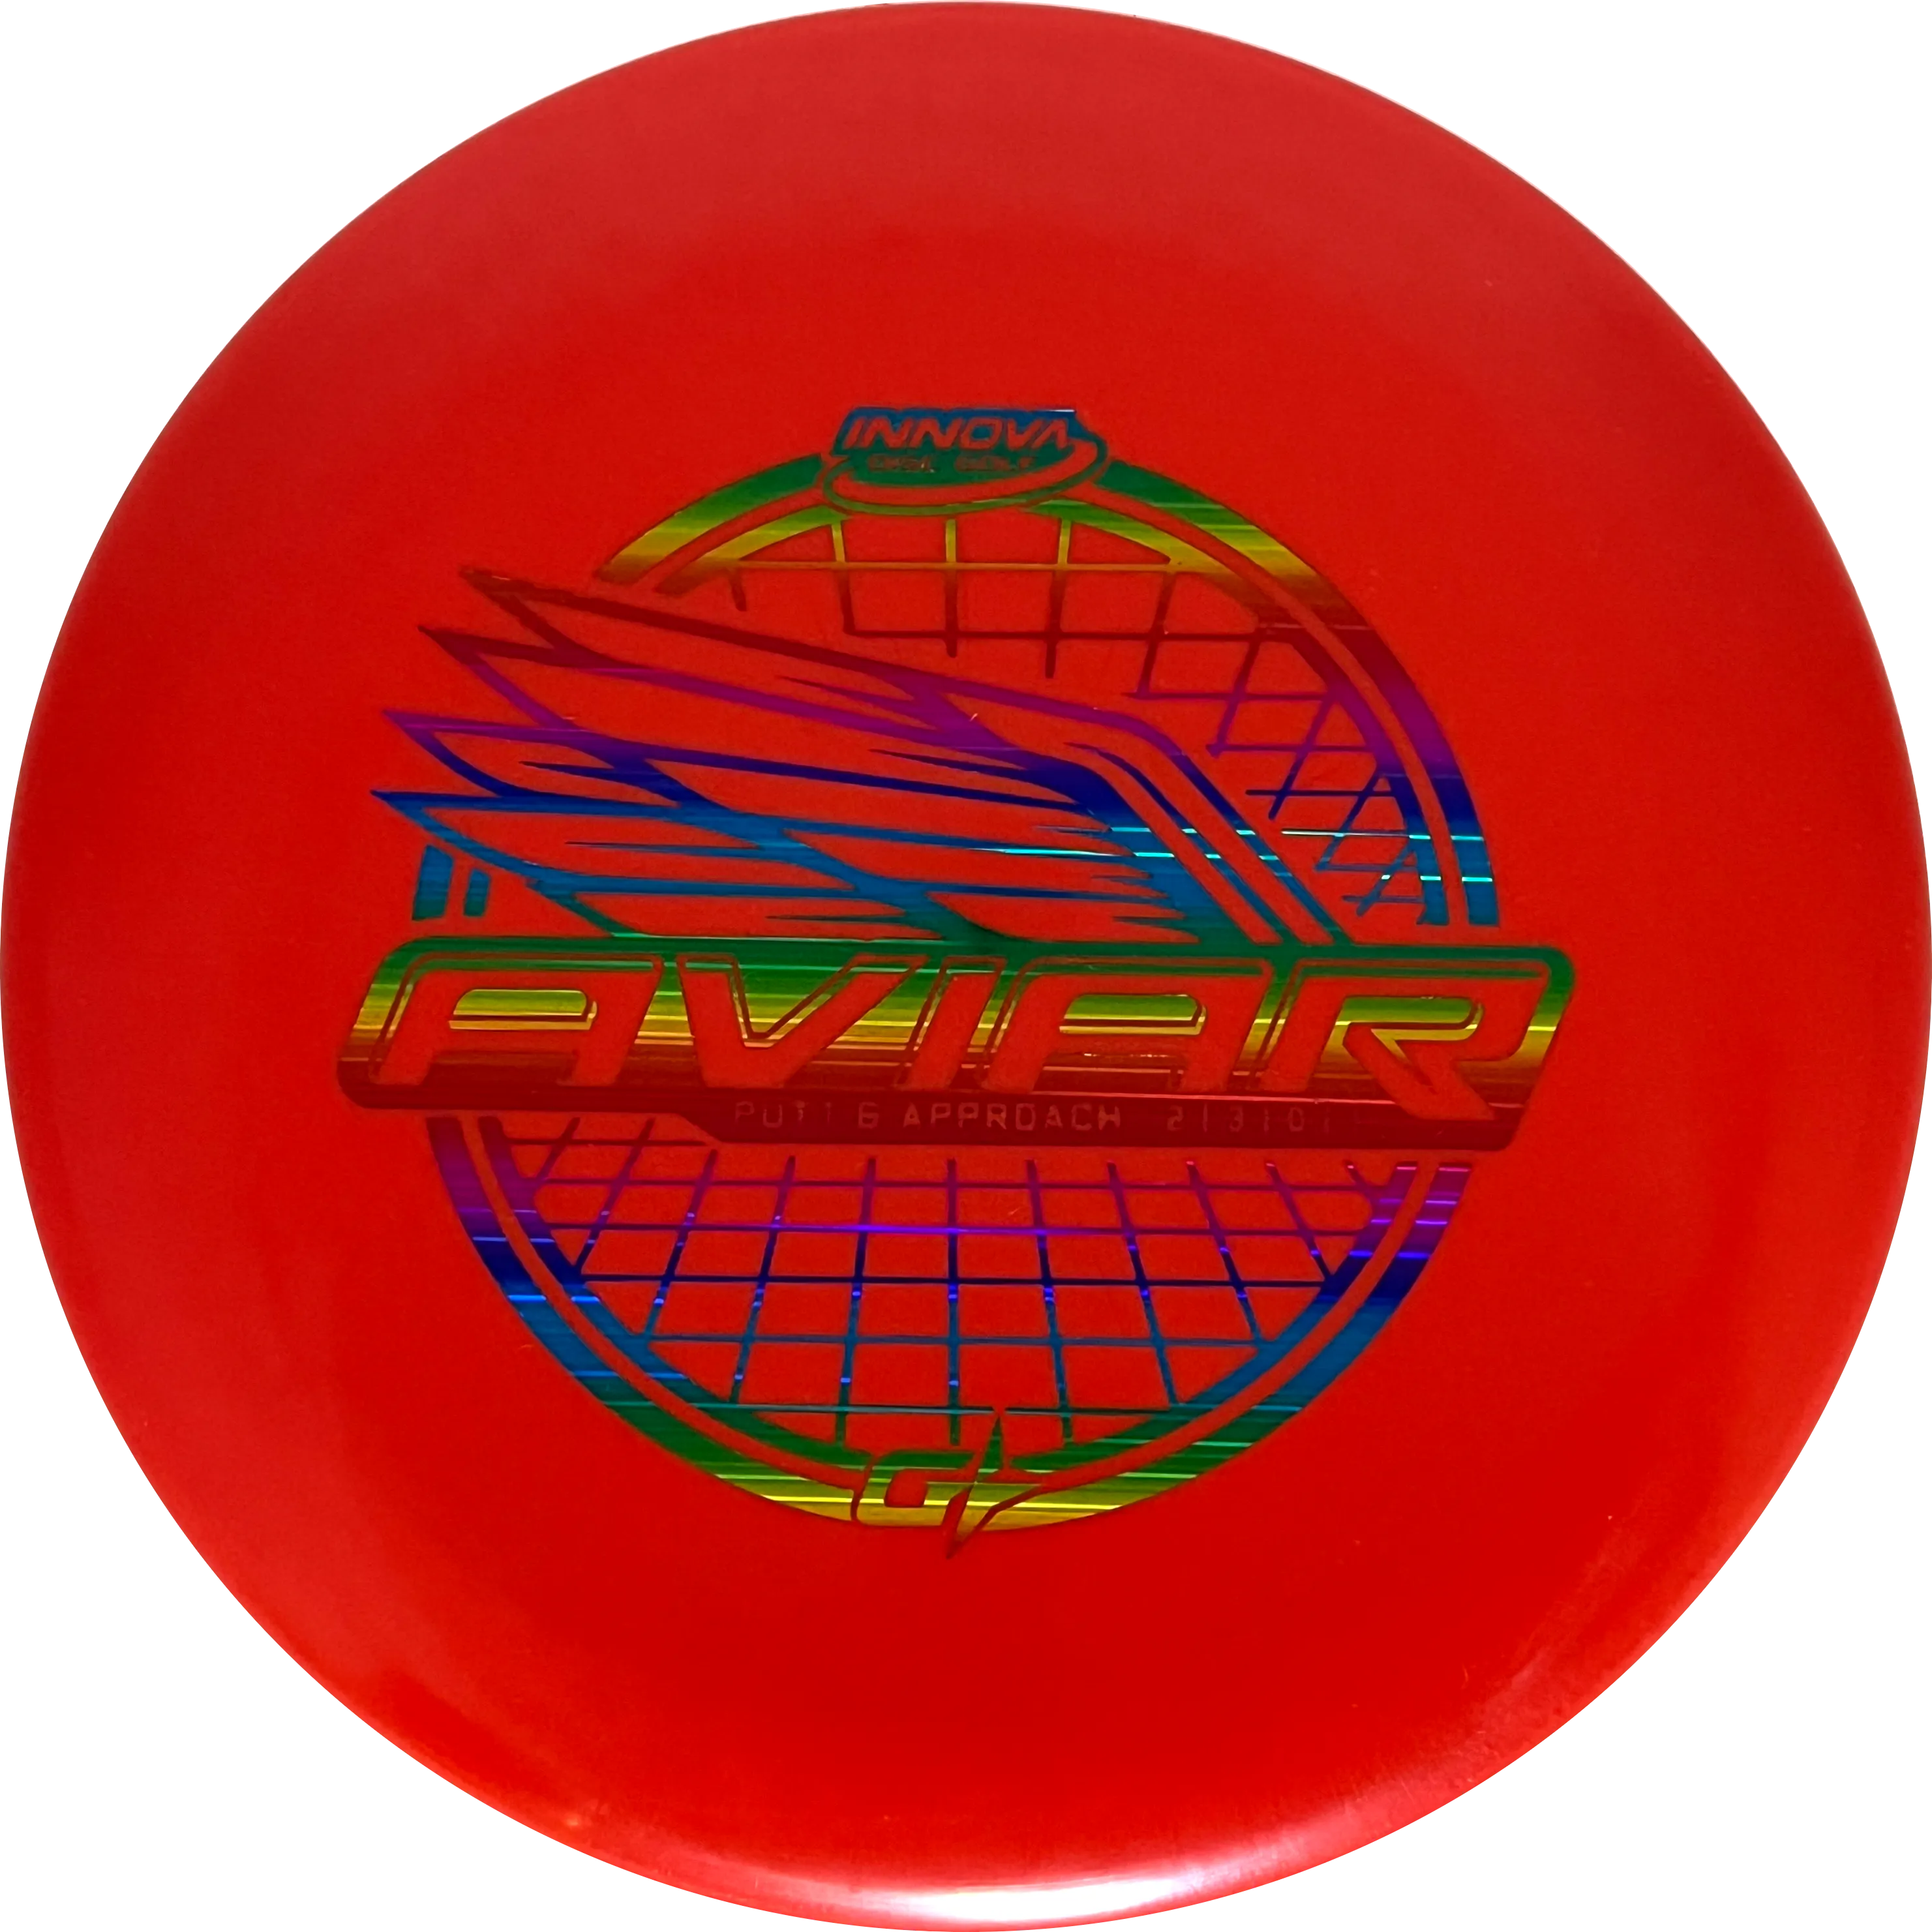 Disc golf - Large selection from Innova